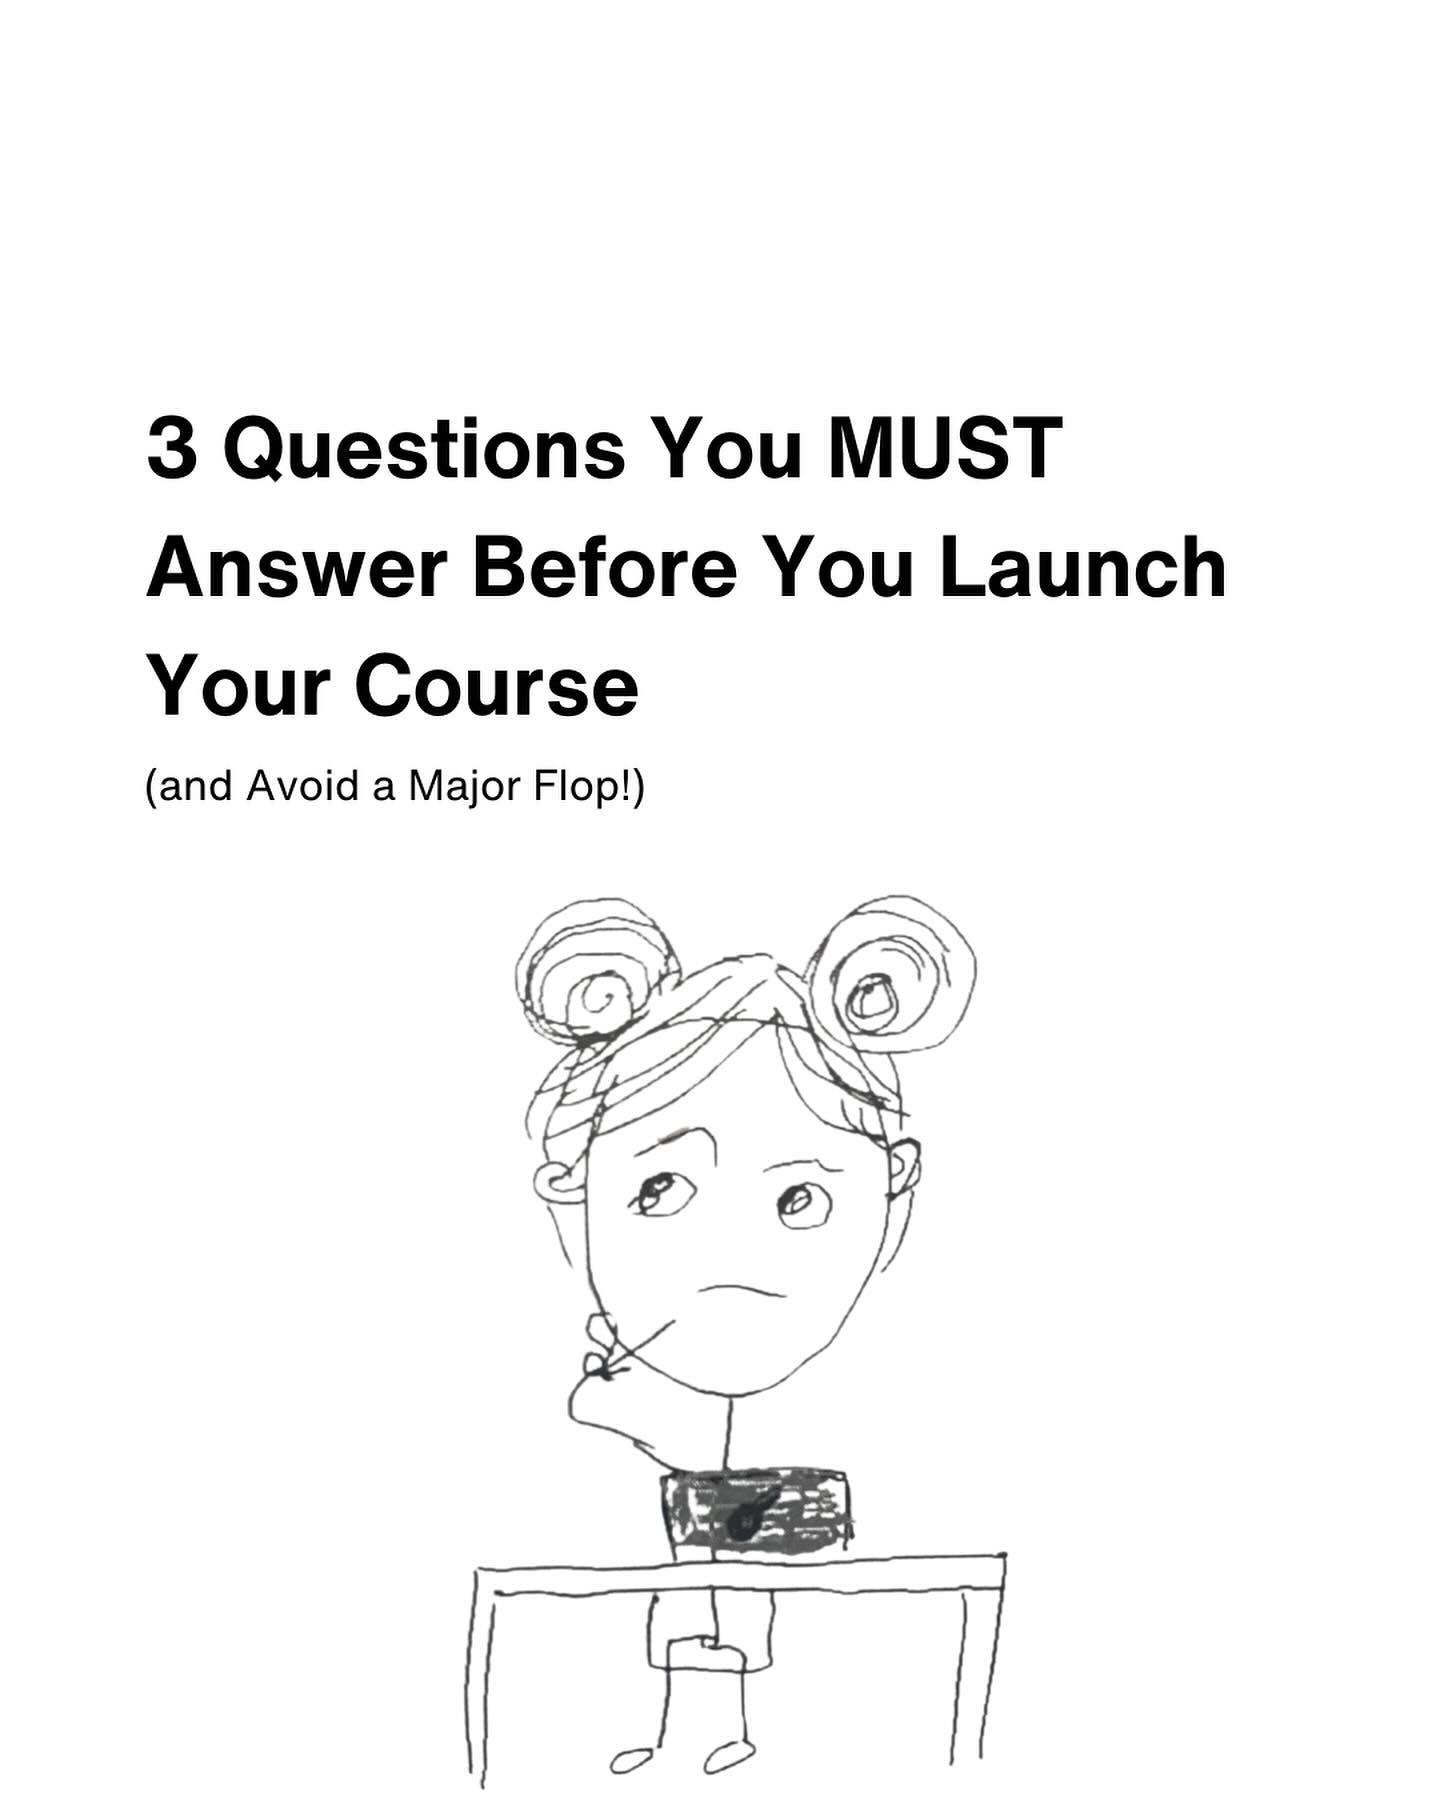 Answer these questions before you make any other moves in your course creation journey! 

Want a proven way to launch a course your students LOVE? Doors to &ldquo;Revolutionize Your Course&rdquo; open in a week!

Click the 🔗  in my bio to join the 1